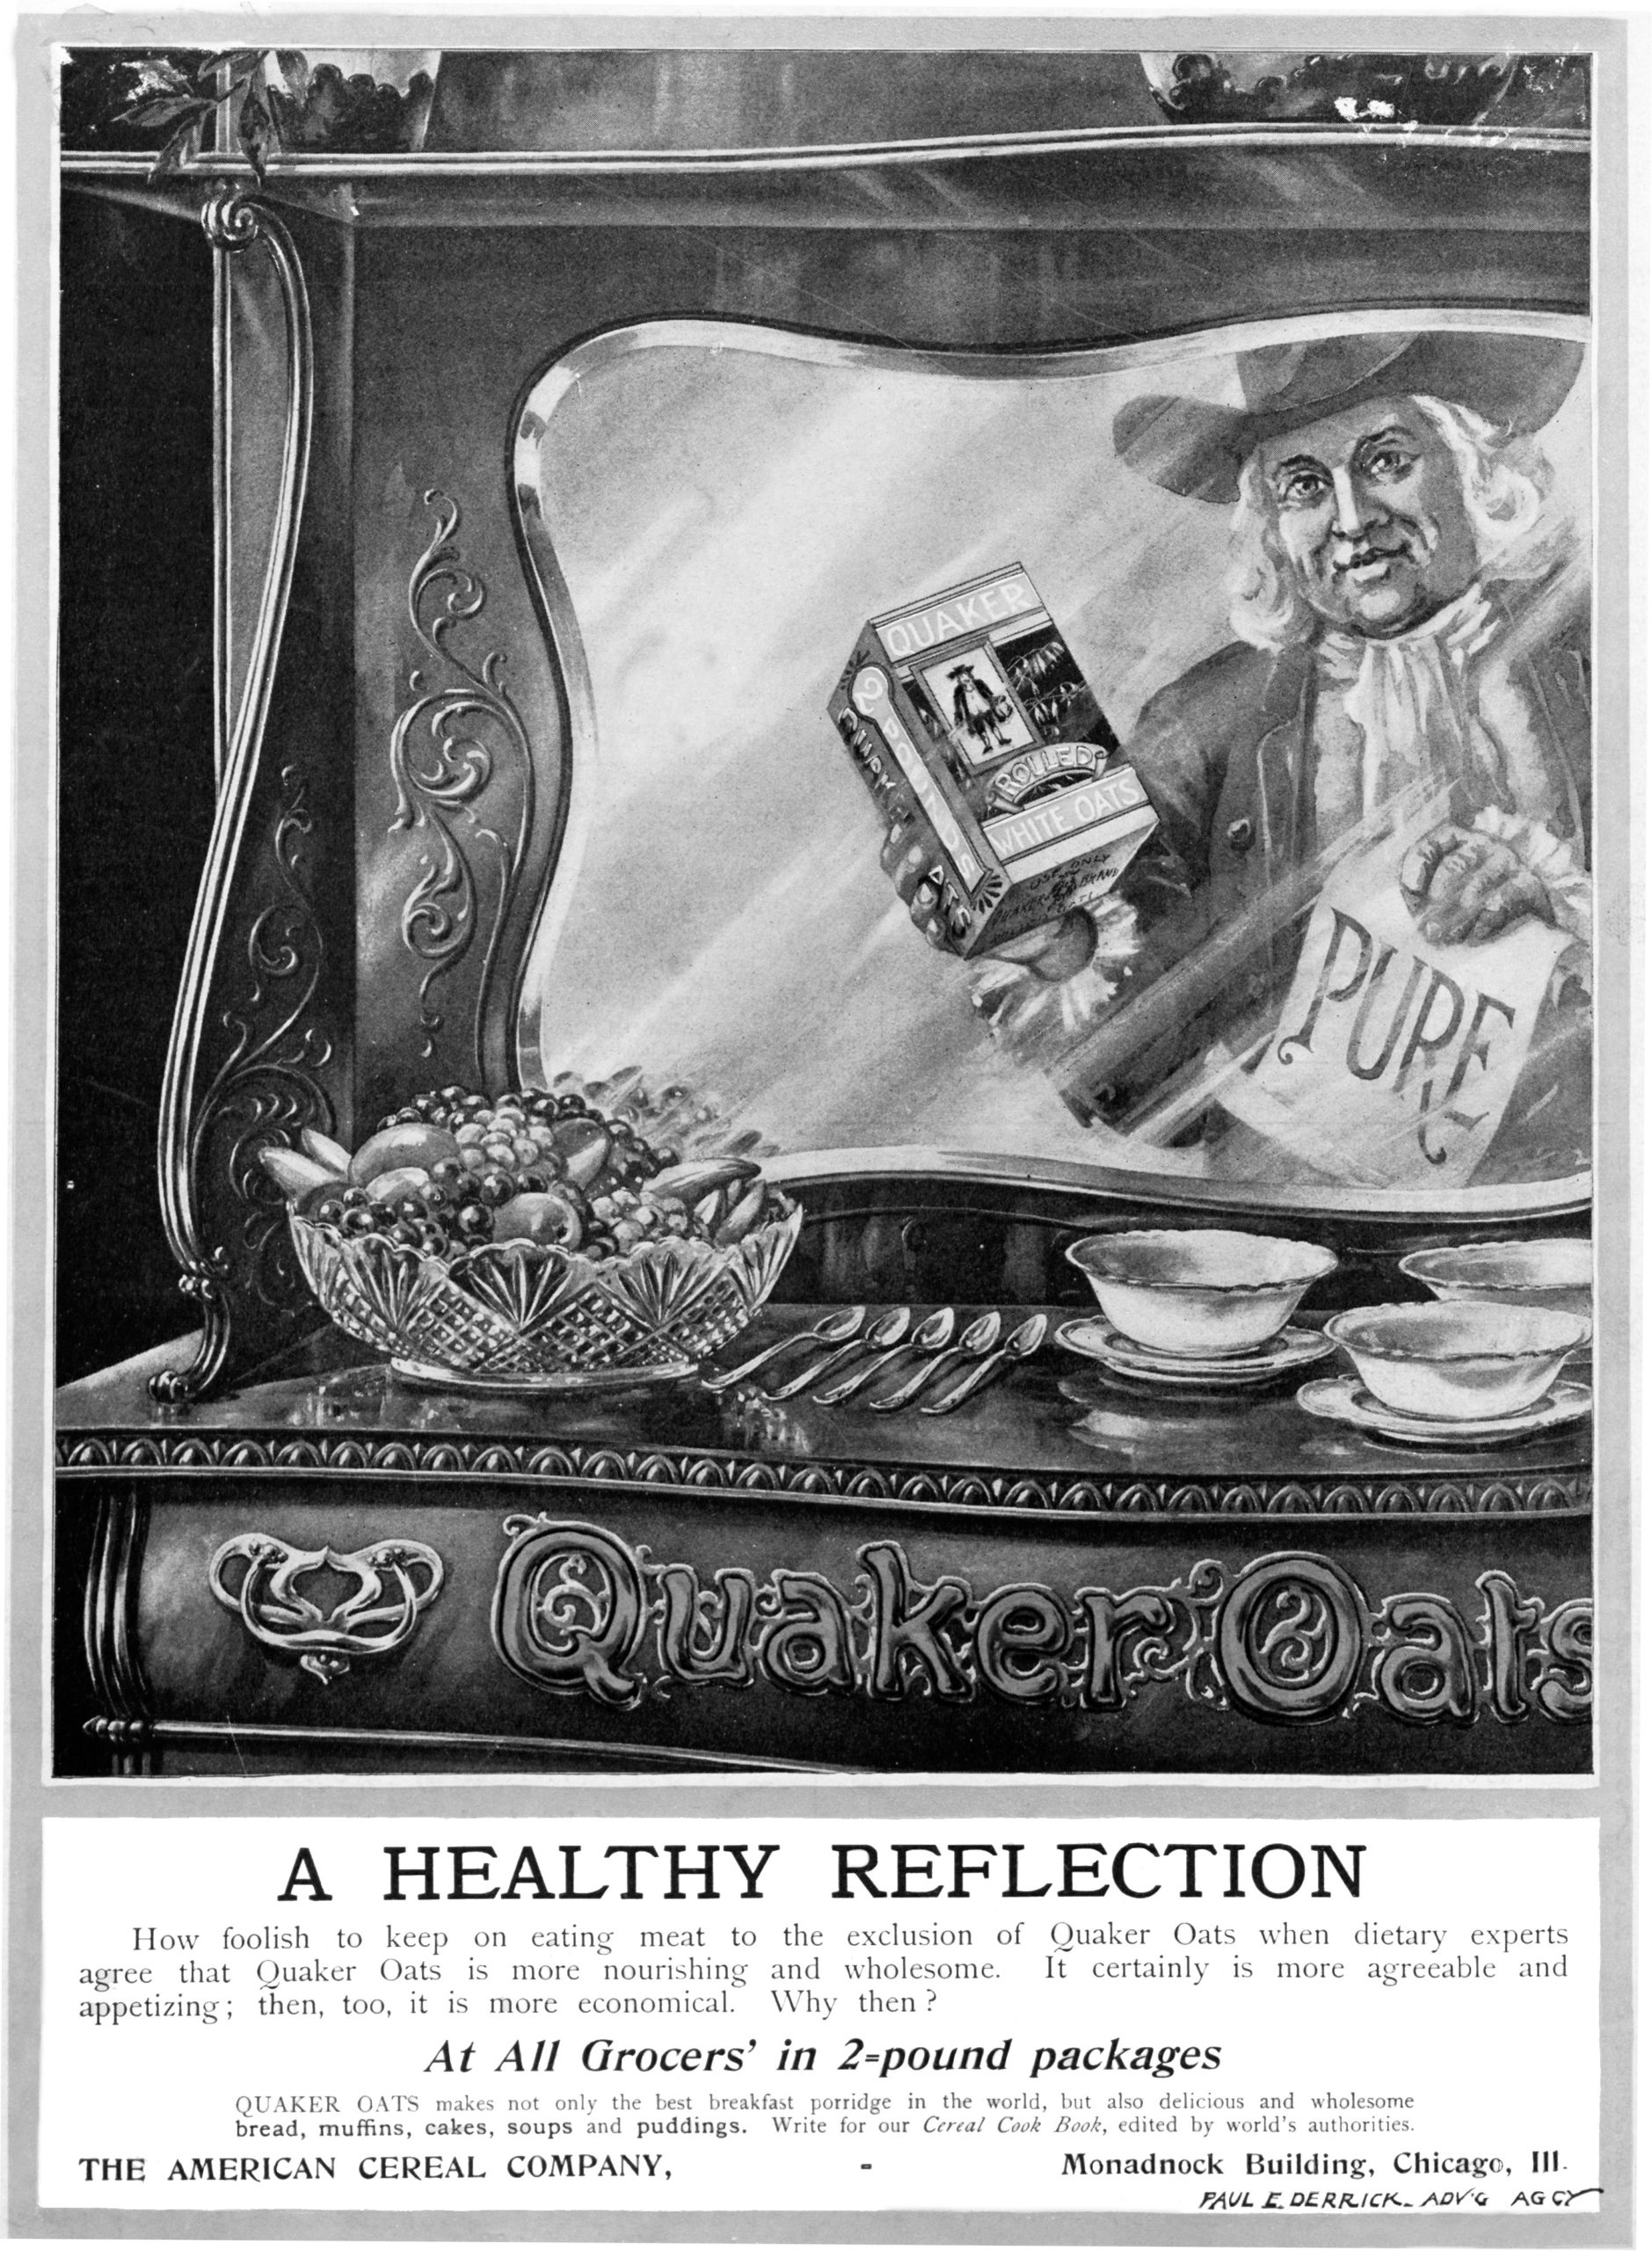 The original Quaker Oats man from a vintage ad emphasizing "purity"